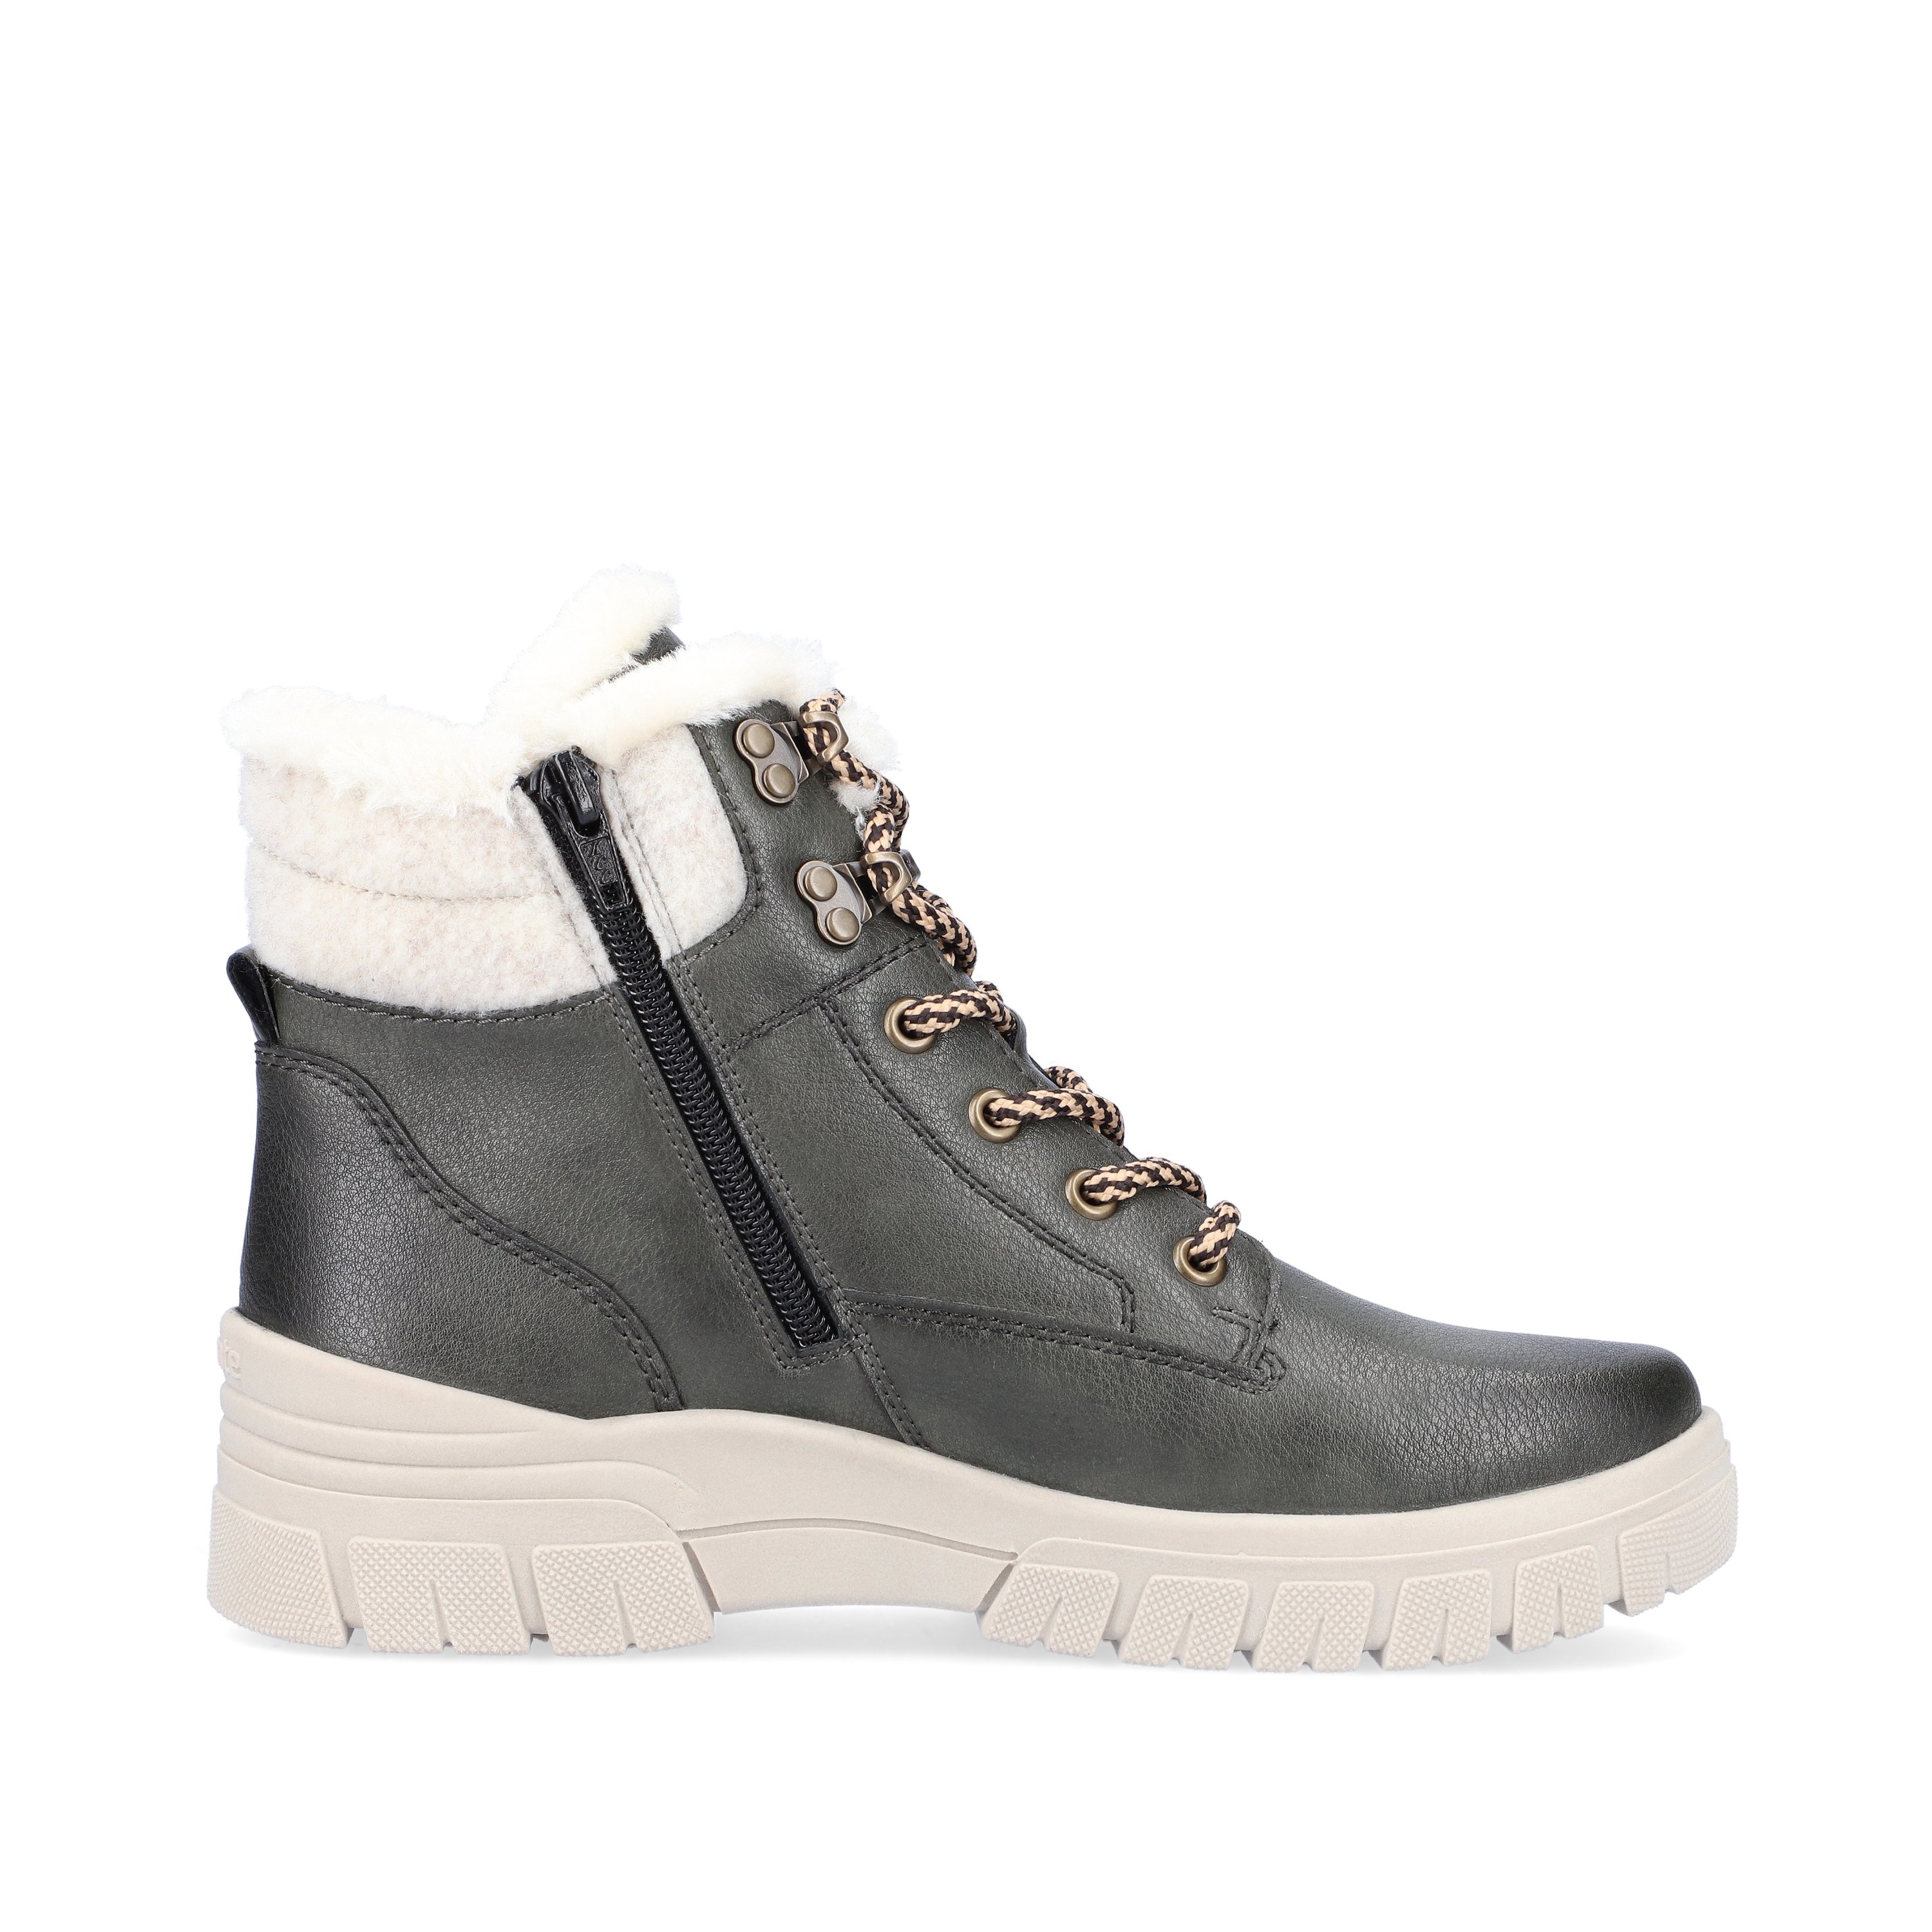 Green-grey remonte women´s lace-up boots D0E71-52 with light profile sole. Shoe inside